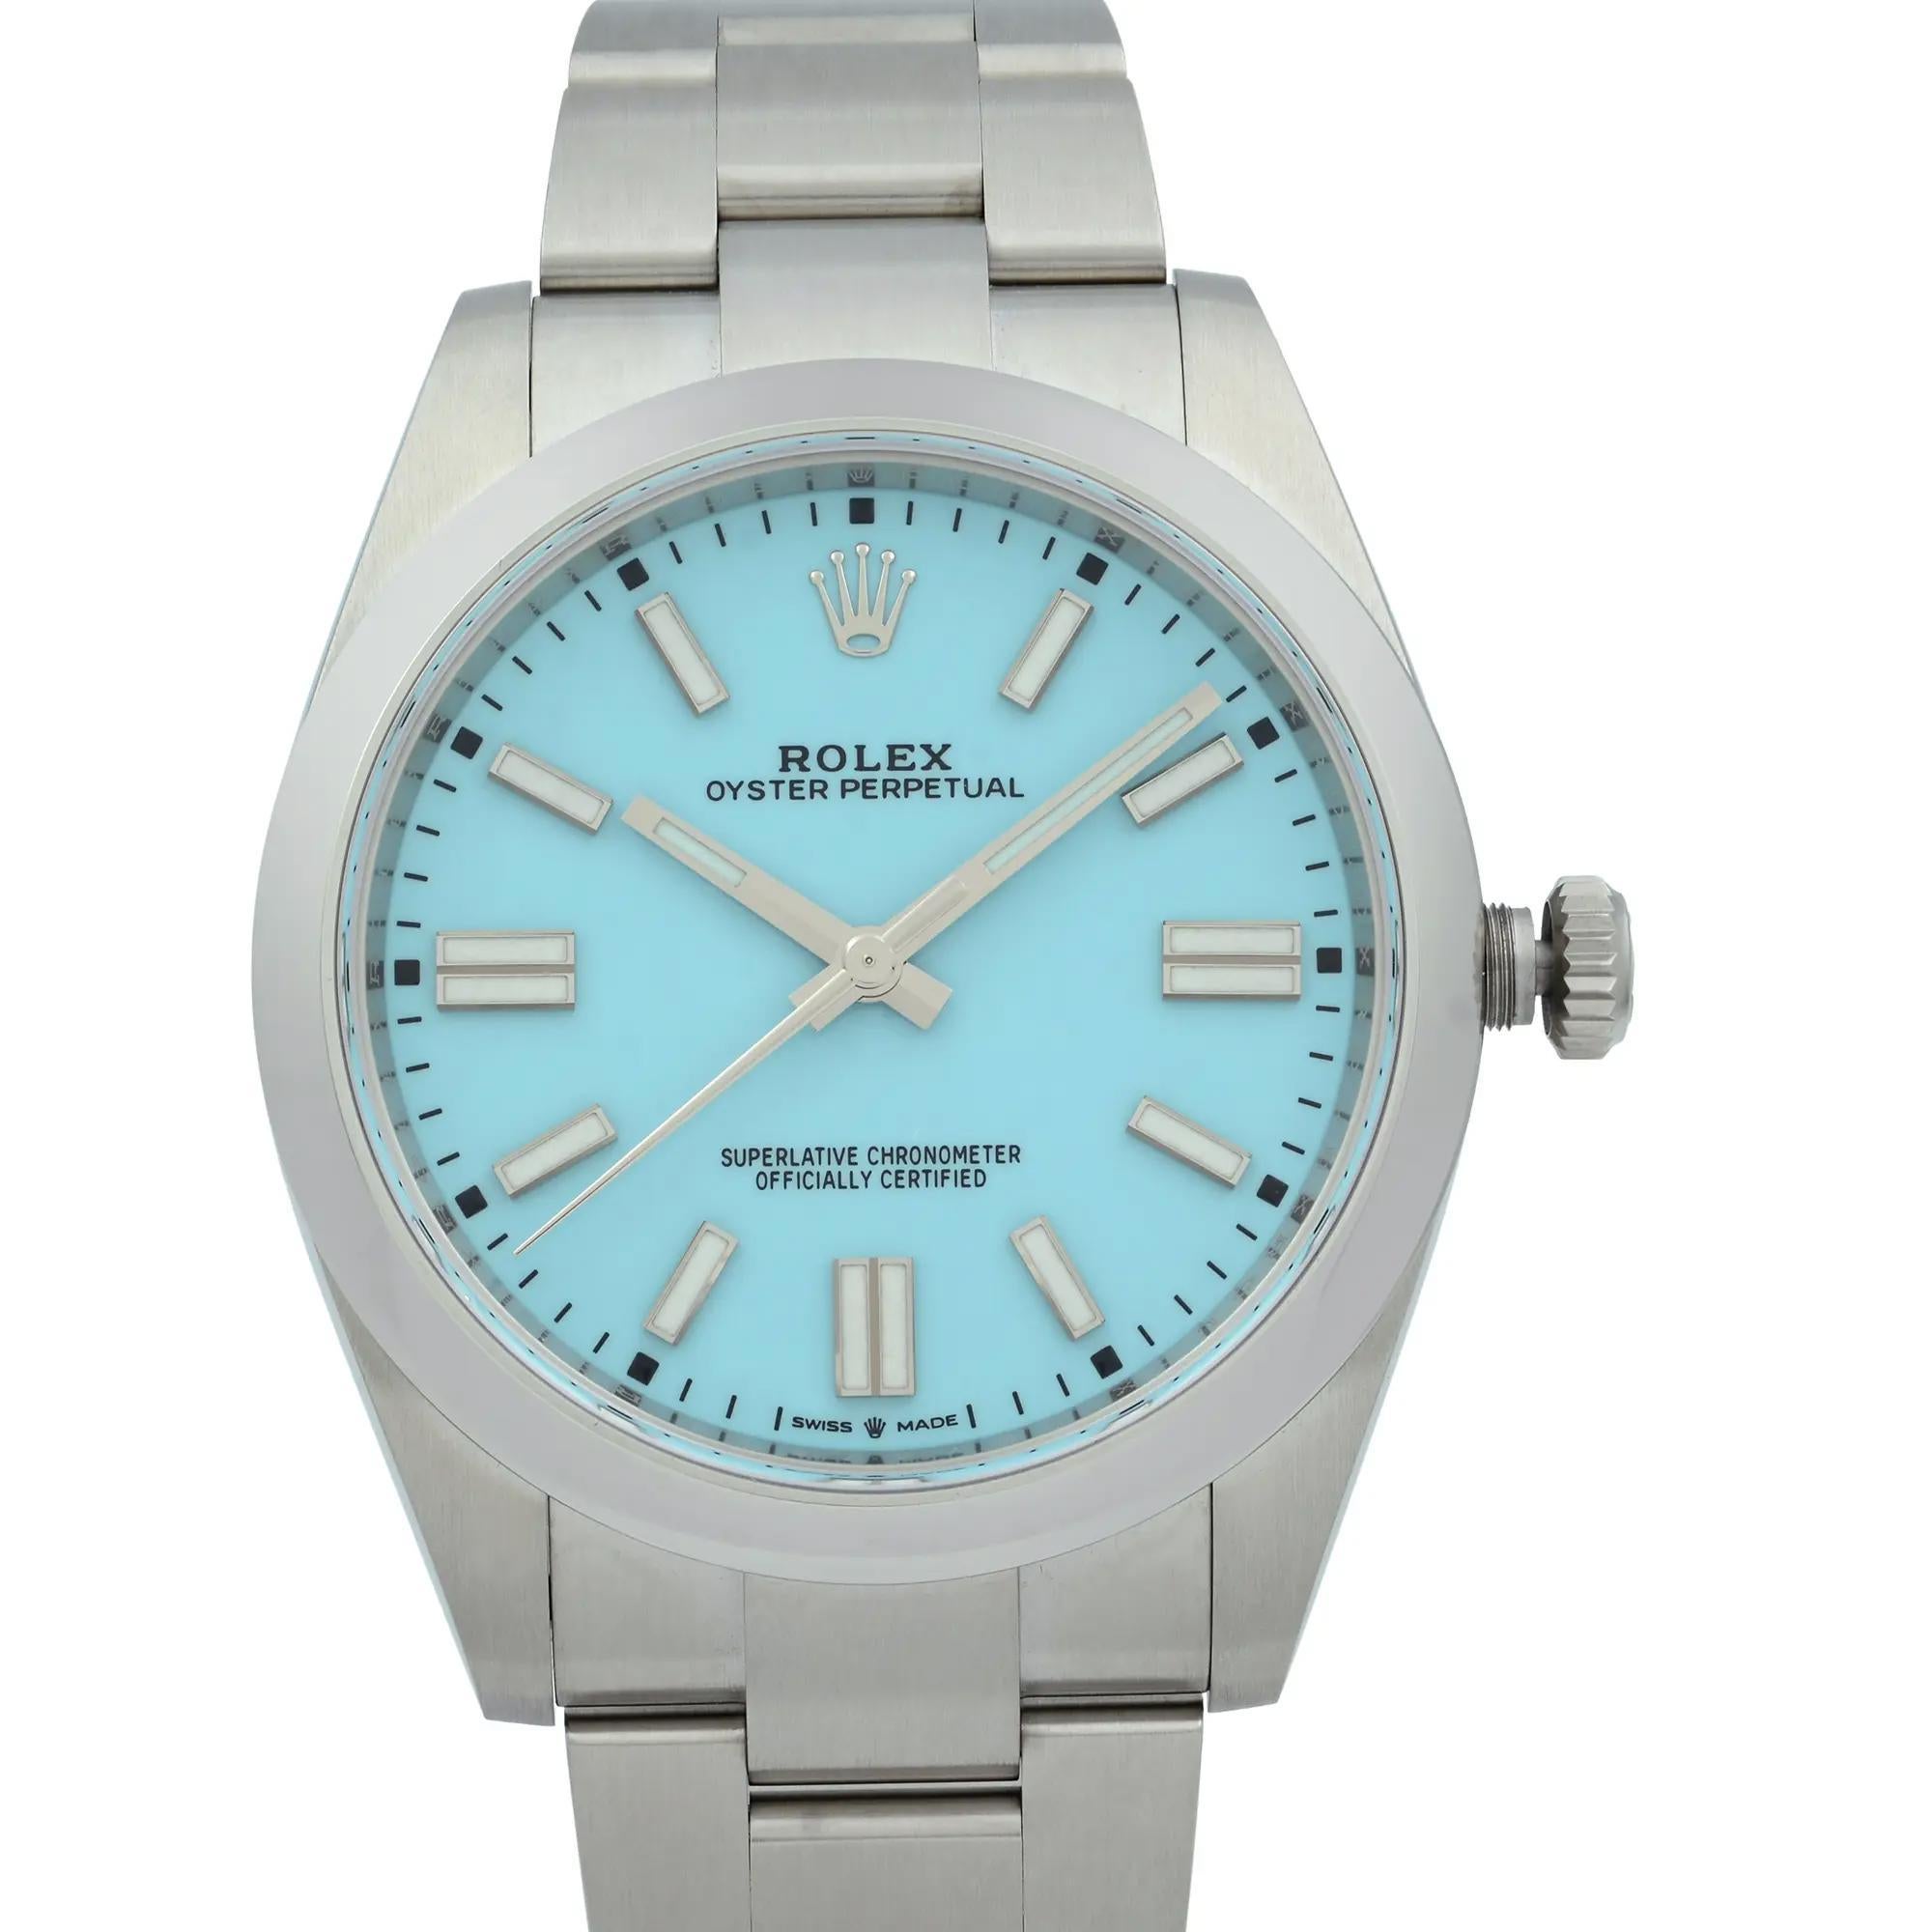 Customized turquoise colored dial from model 124300. The watch has a minor patina on minute and hour hands. 

* Free Shipping within the USA
* Two-year warranty coverage
* 14-day return policy with a full refund. Buyers can verify the watch's